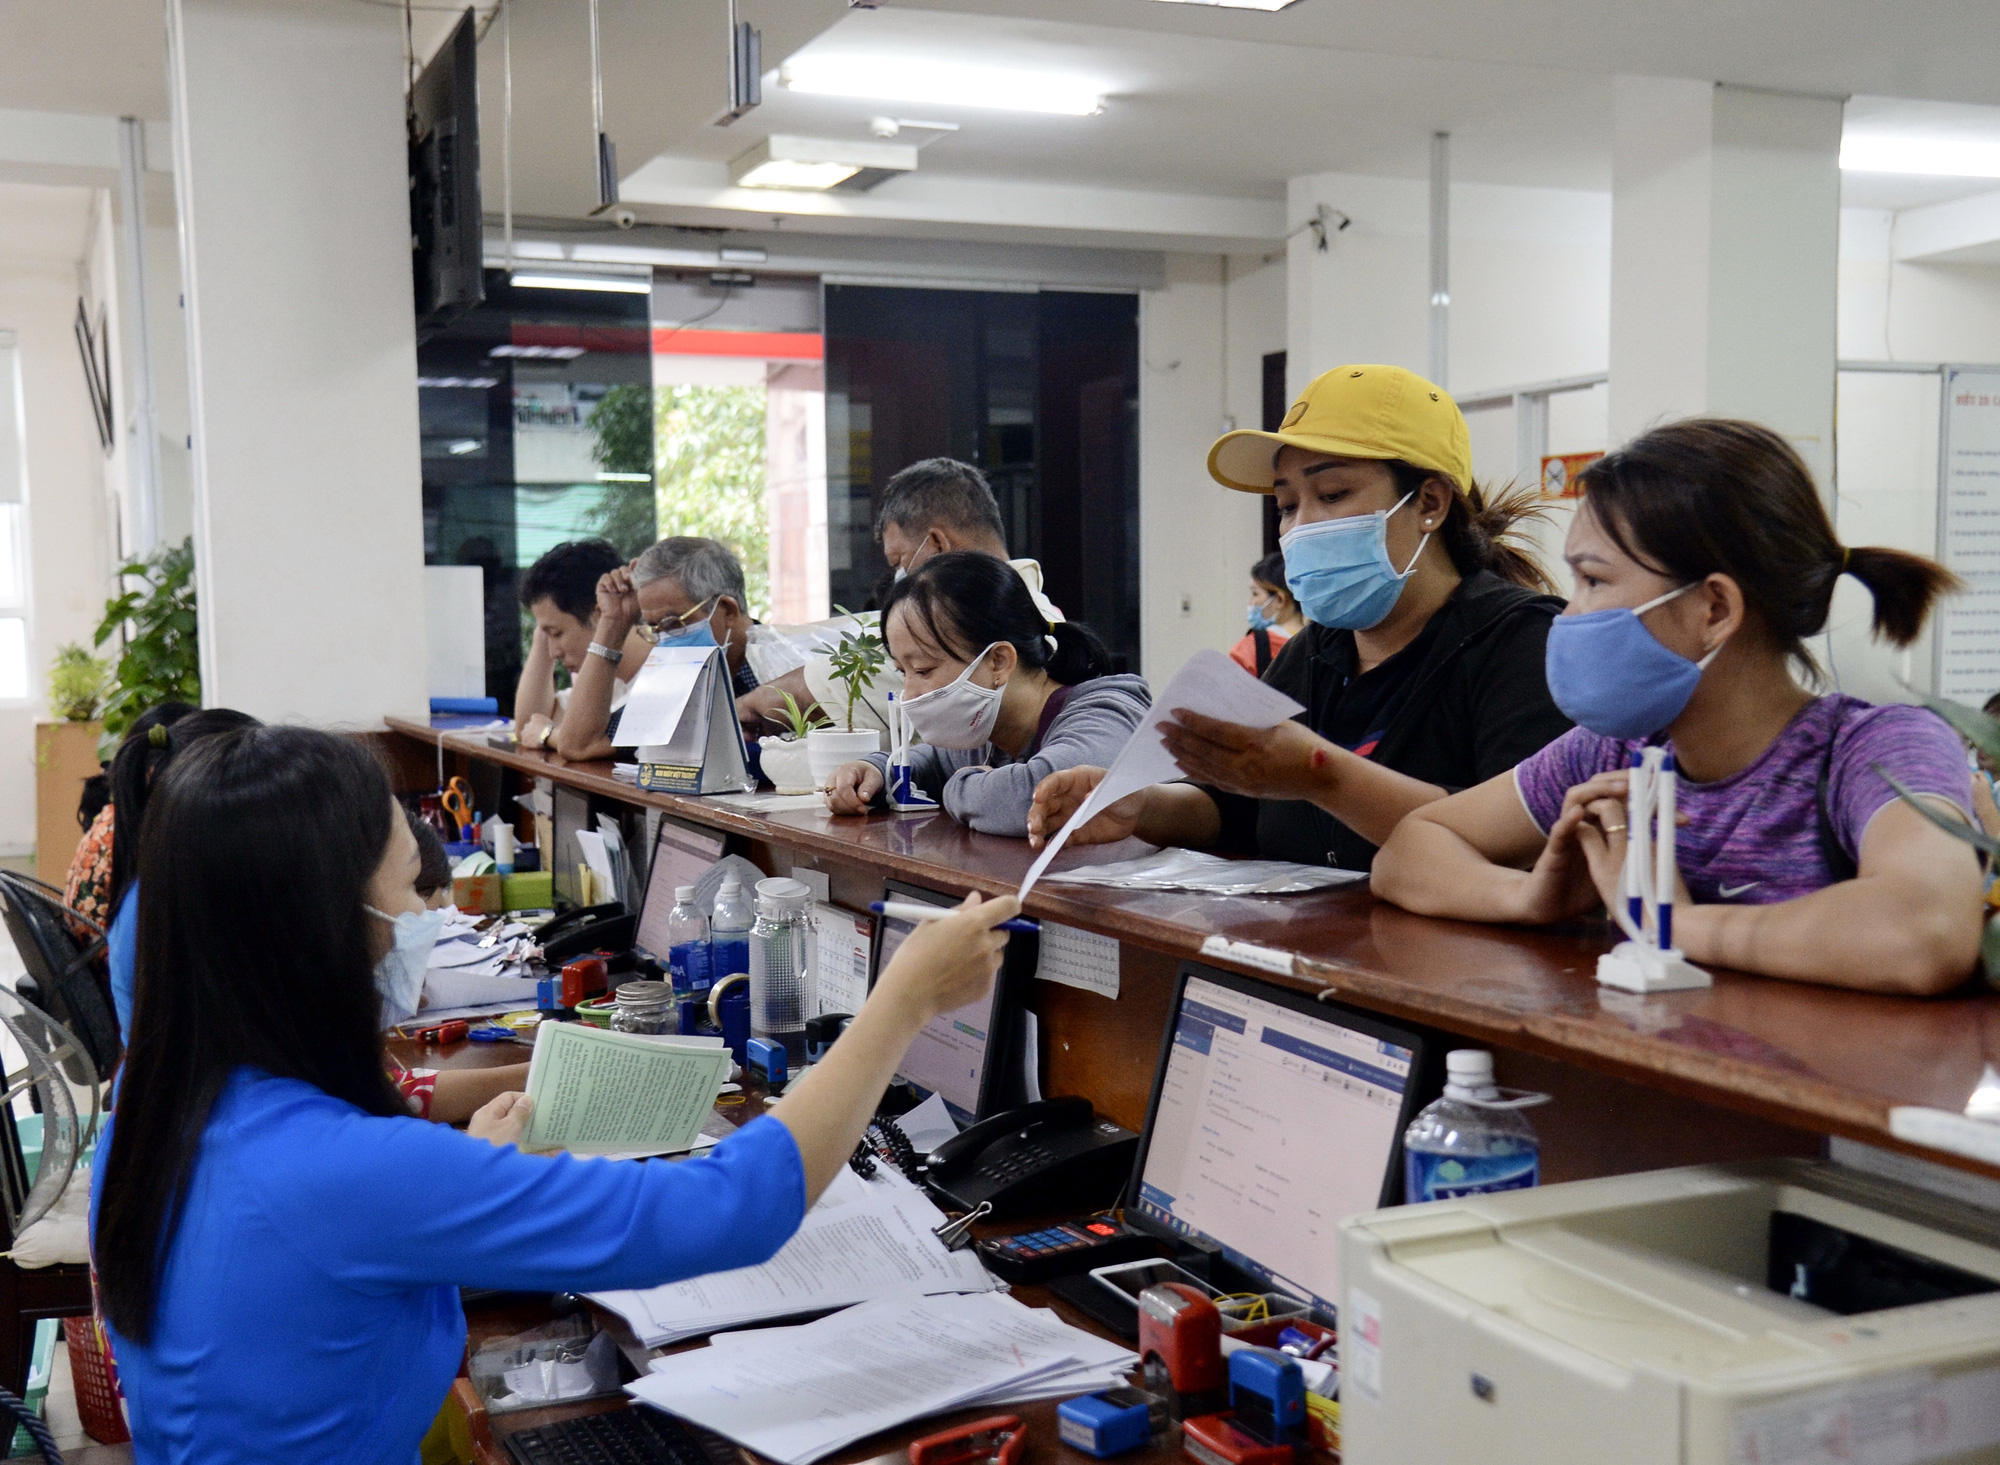 Up to 500,000 people may lose jobs to COVID-19 in Ho Chi Minh City